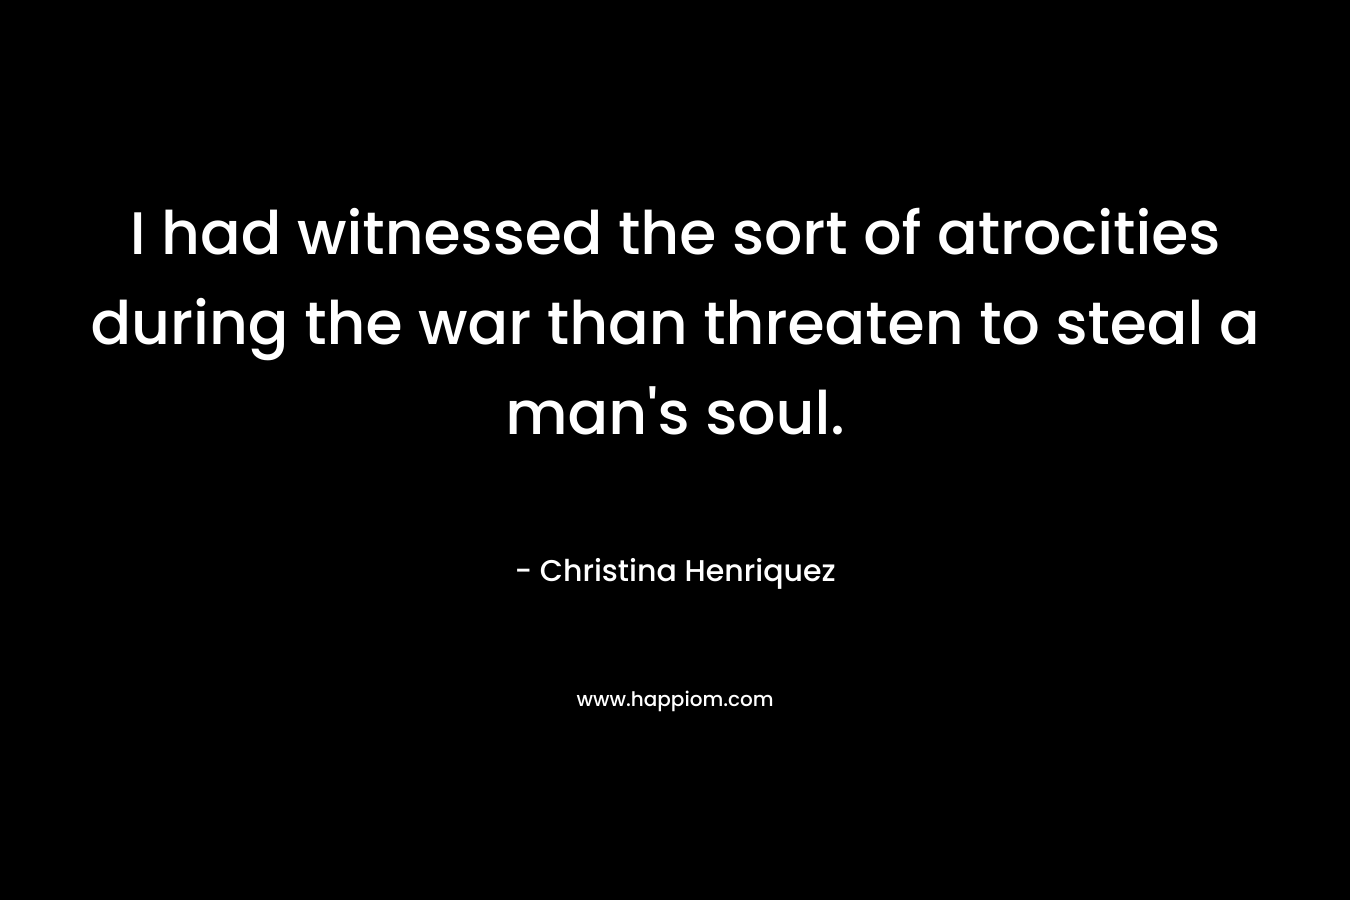 I had witnessed the sort of atrocities during the war than threaten to steal a man’s soul. – Christina Henriquez